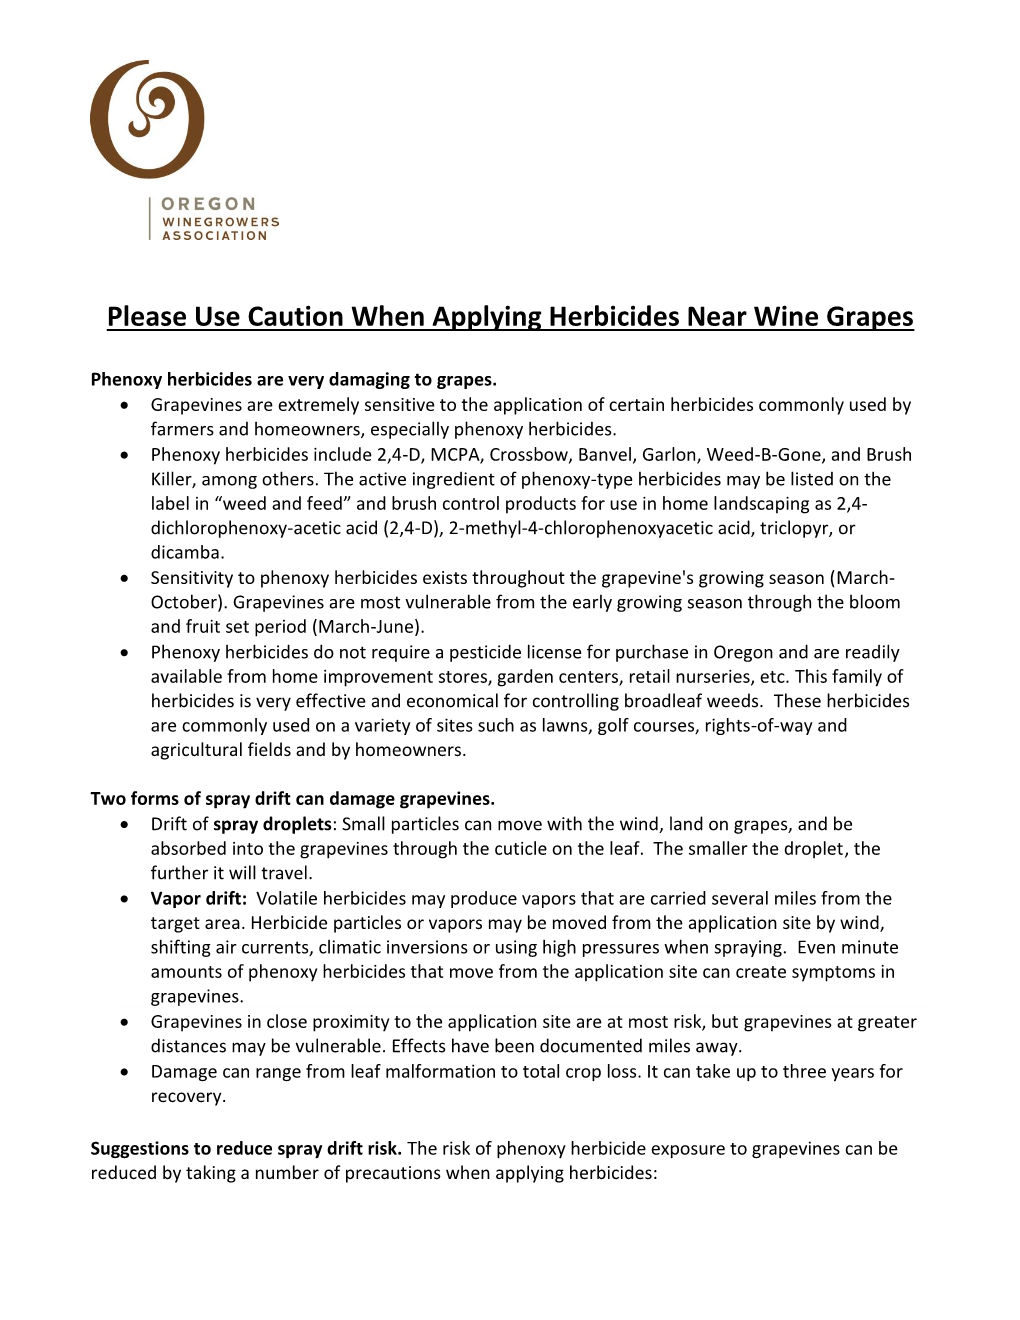 Please Use Caution When Applying Herbicides Near Wine Grapes